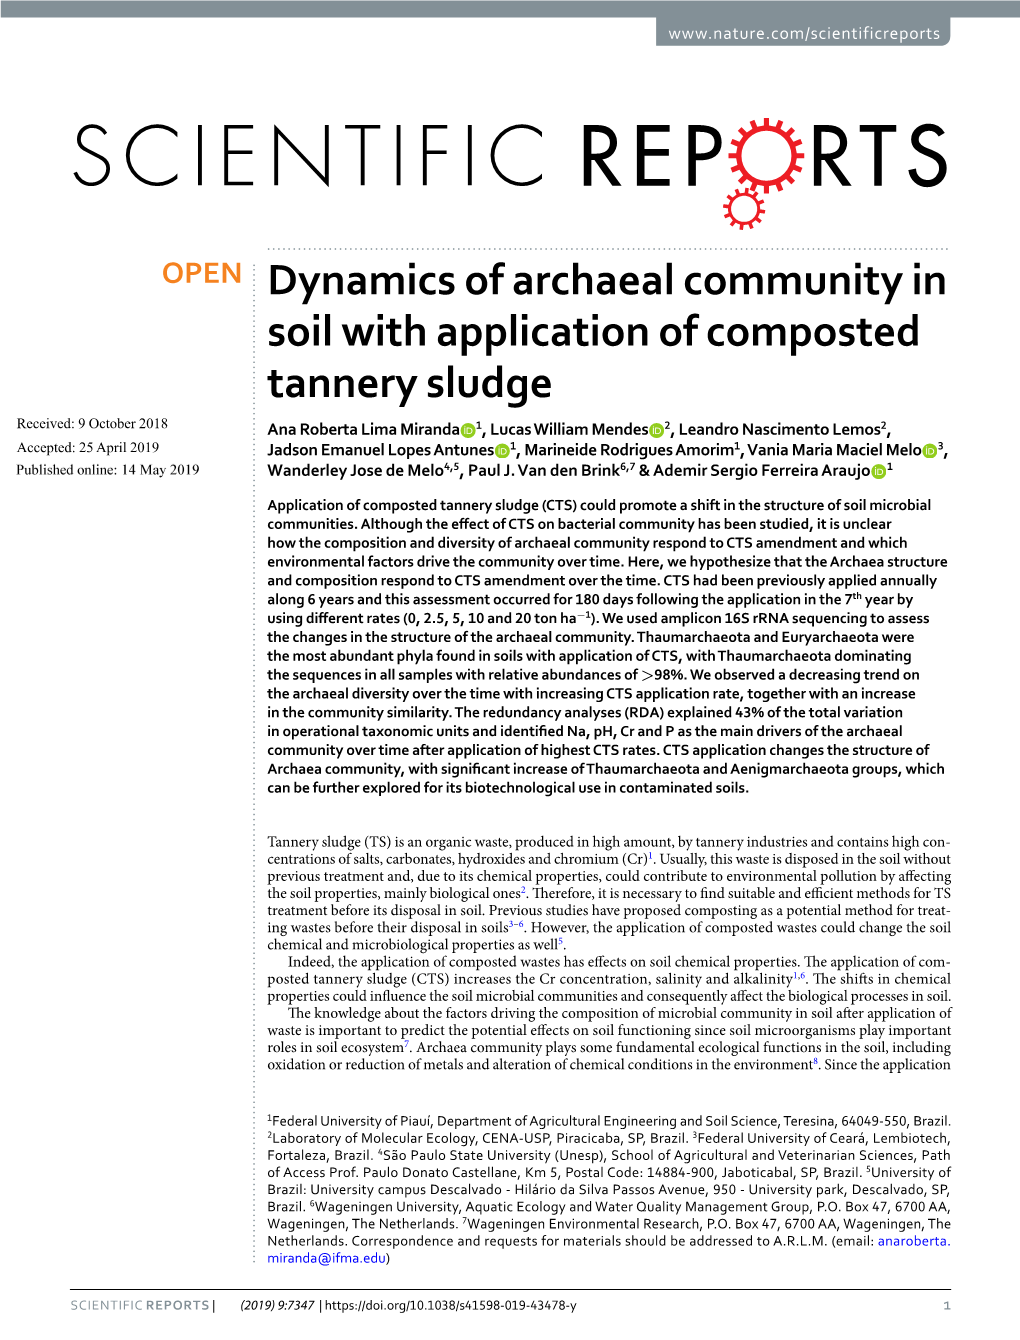 Dynamics of Archaeal Community in Soil with Application of Composted